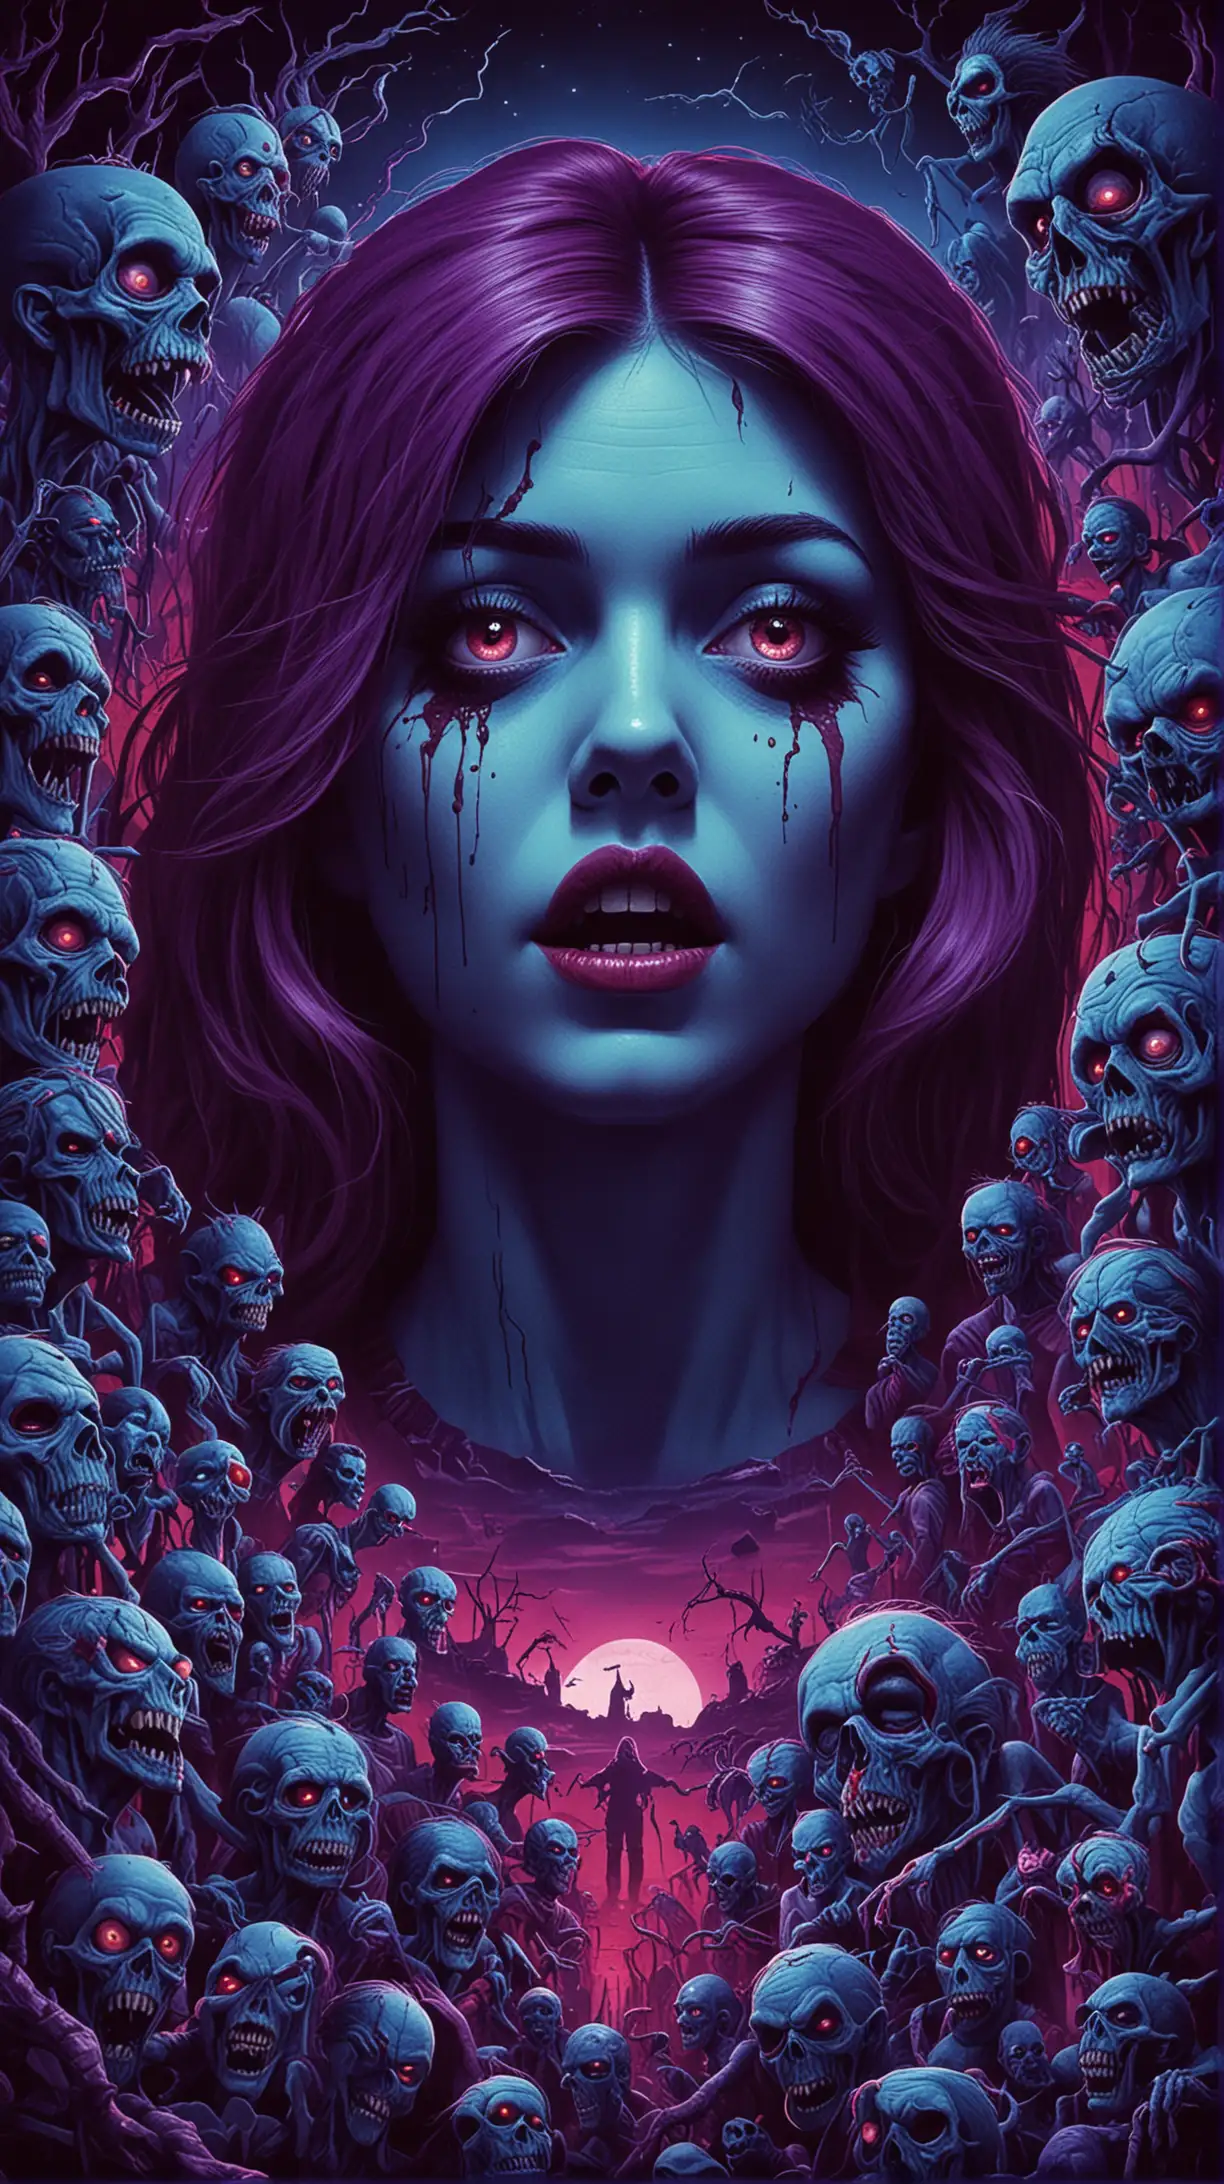 Generate a poster in a horror movie style of the 80s with blue hues, reds, and purple. Use this film synopsis for the cover, A talented stop-motion animator becomes consumed by the grotesque world of her horrifying creations -- with deadly results. NO TEXT